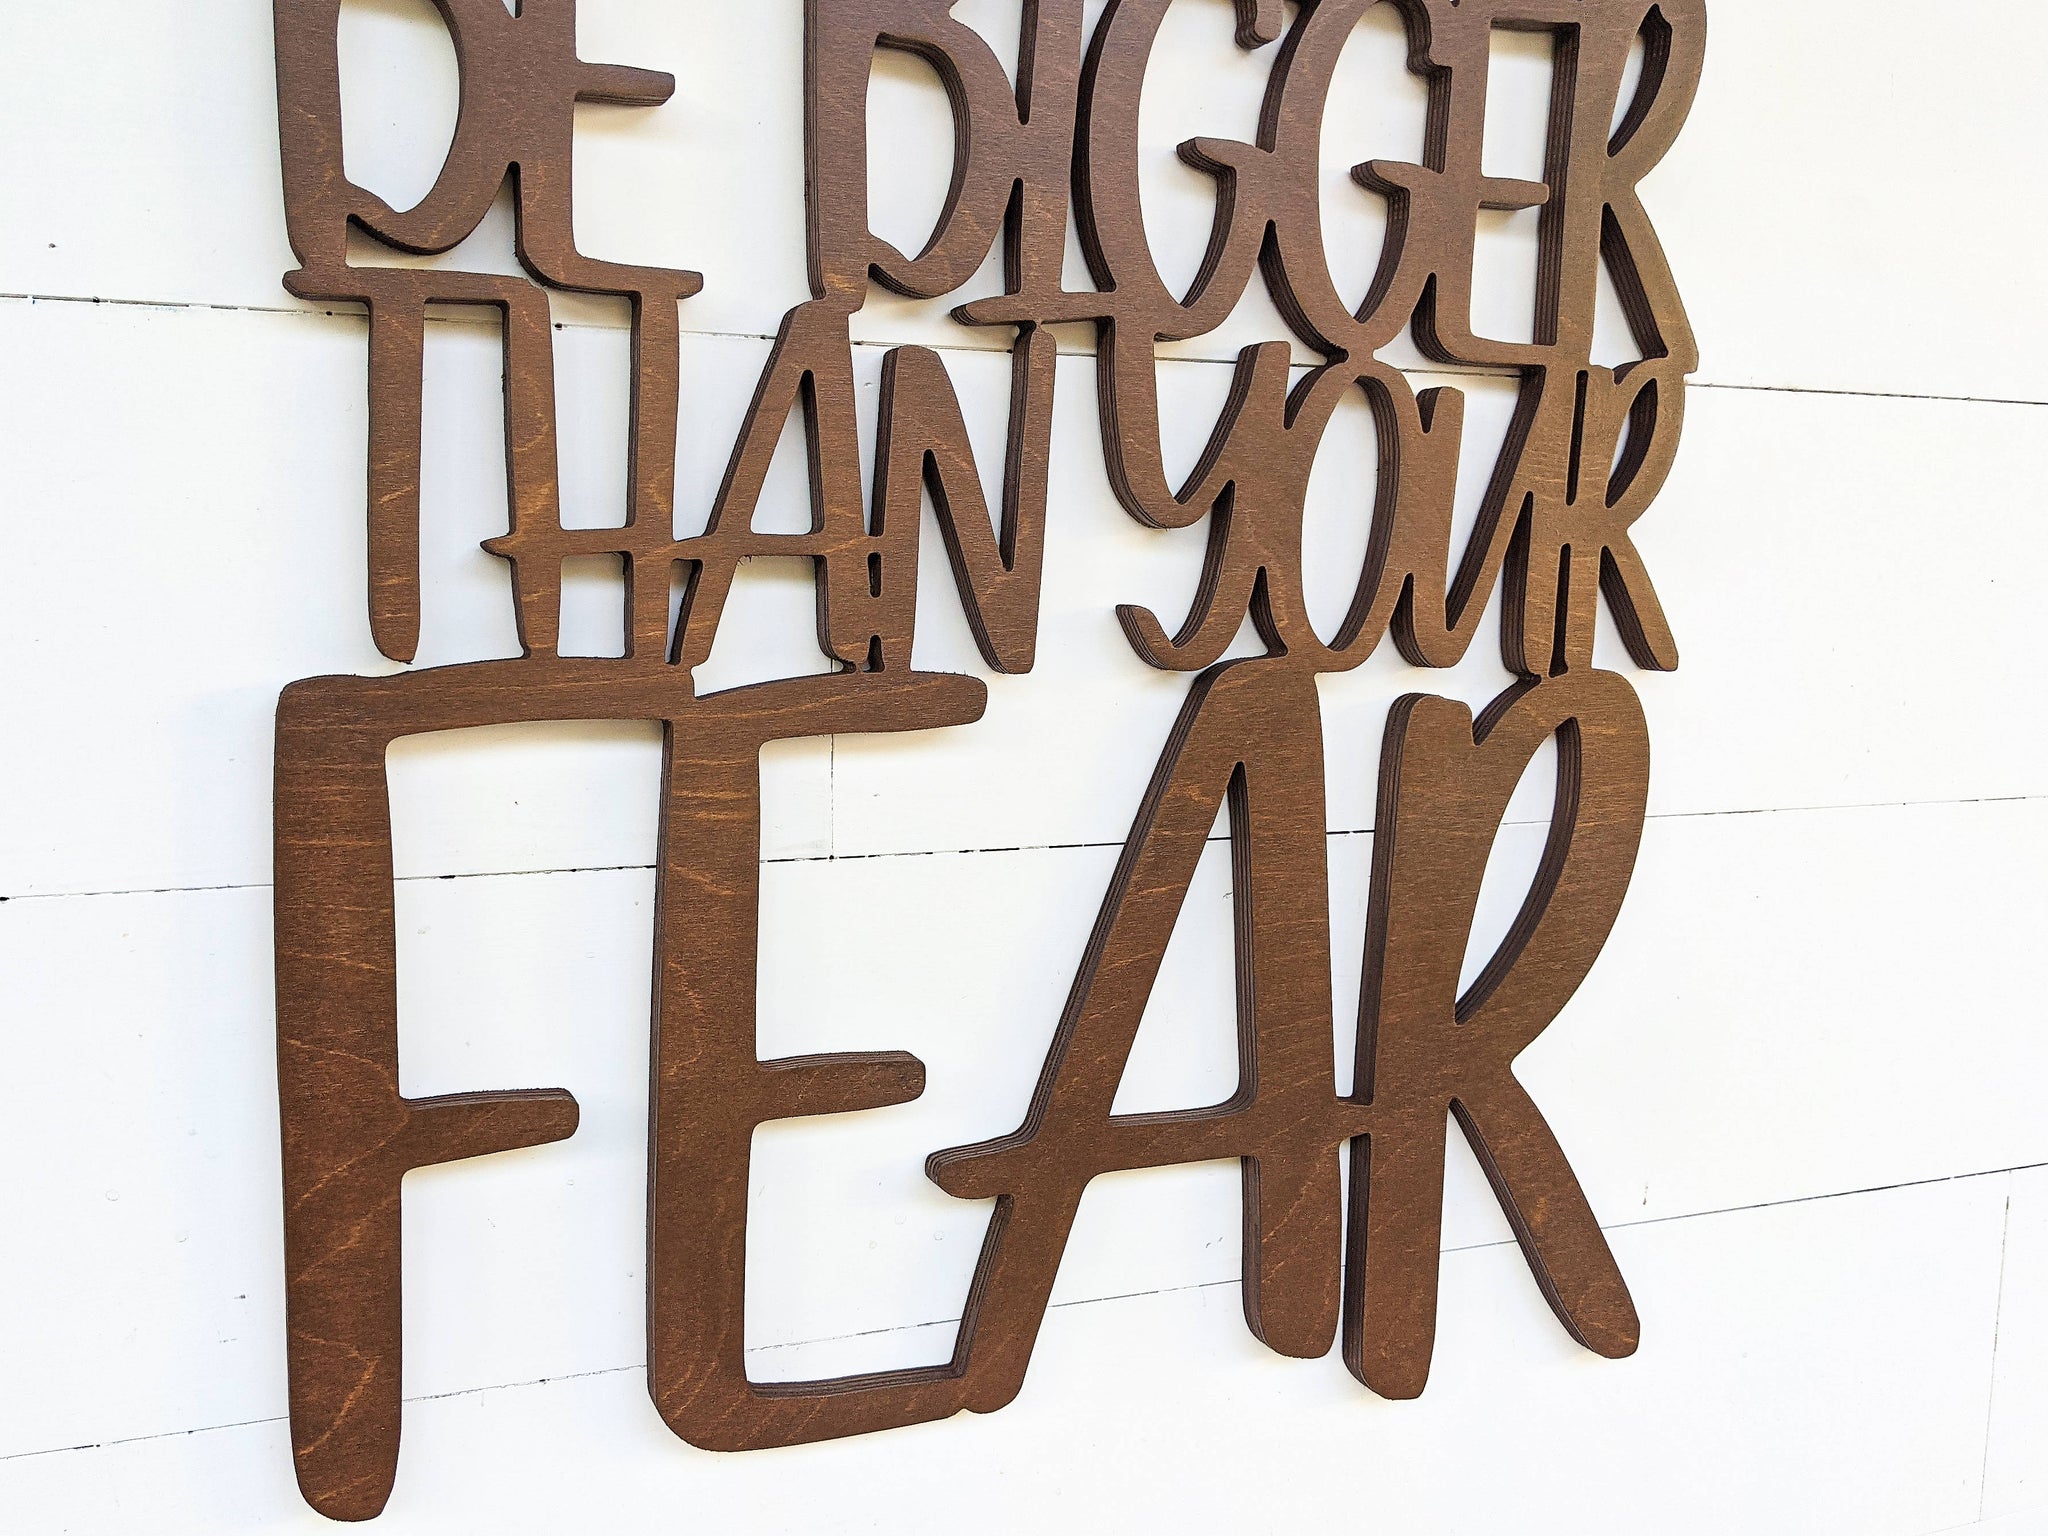 Let Your Faith Be Bigger Than Your Fear